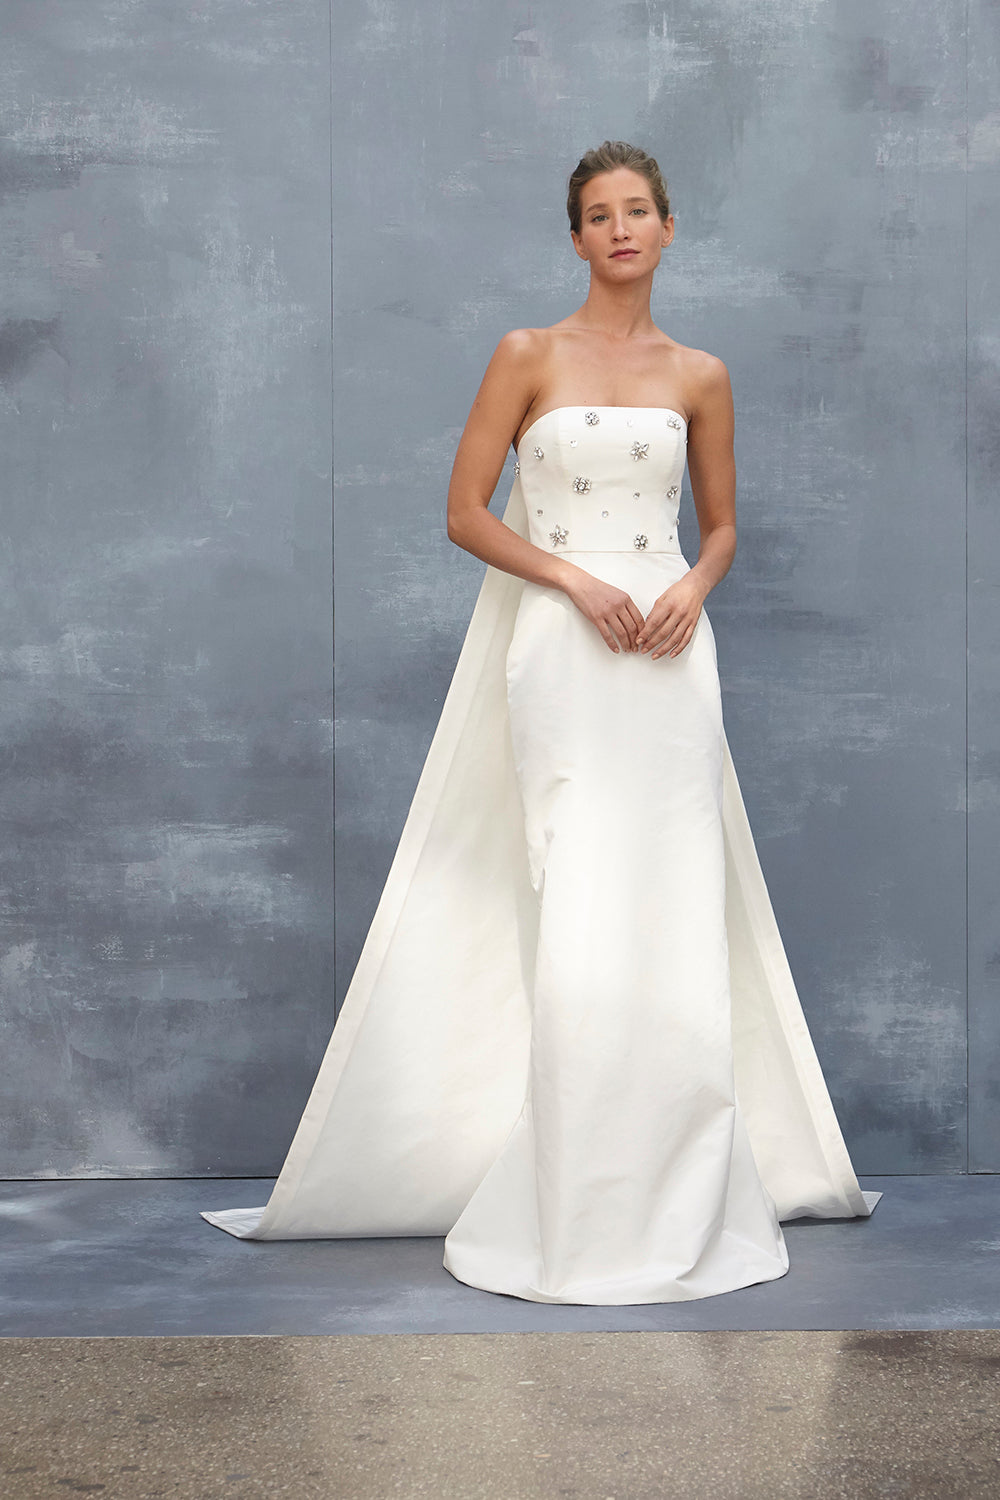 New Amsale Wedding Dresses For Fall 2016 Are Modern And Romantic | HuffPost  Life